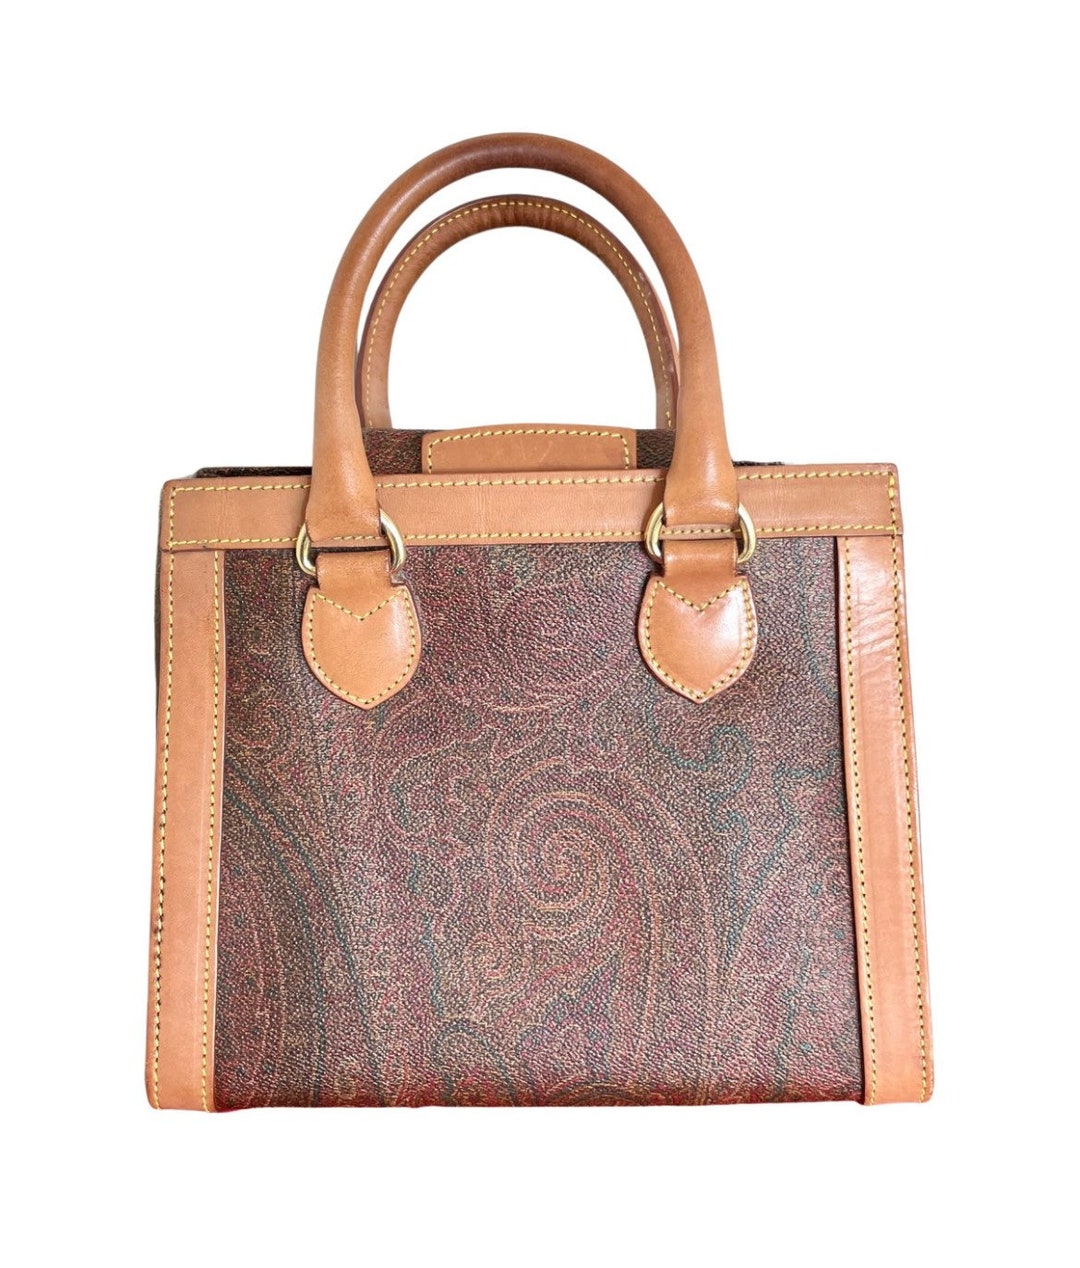 Vintage ETRO Cloth Leather Paisley Tote Handbag Made in Italy